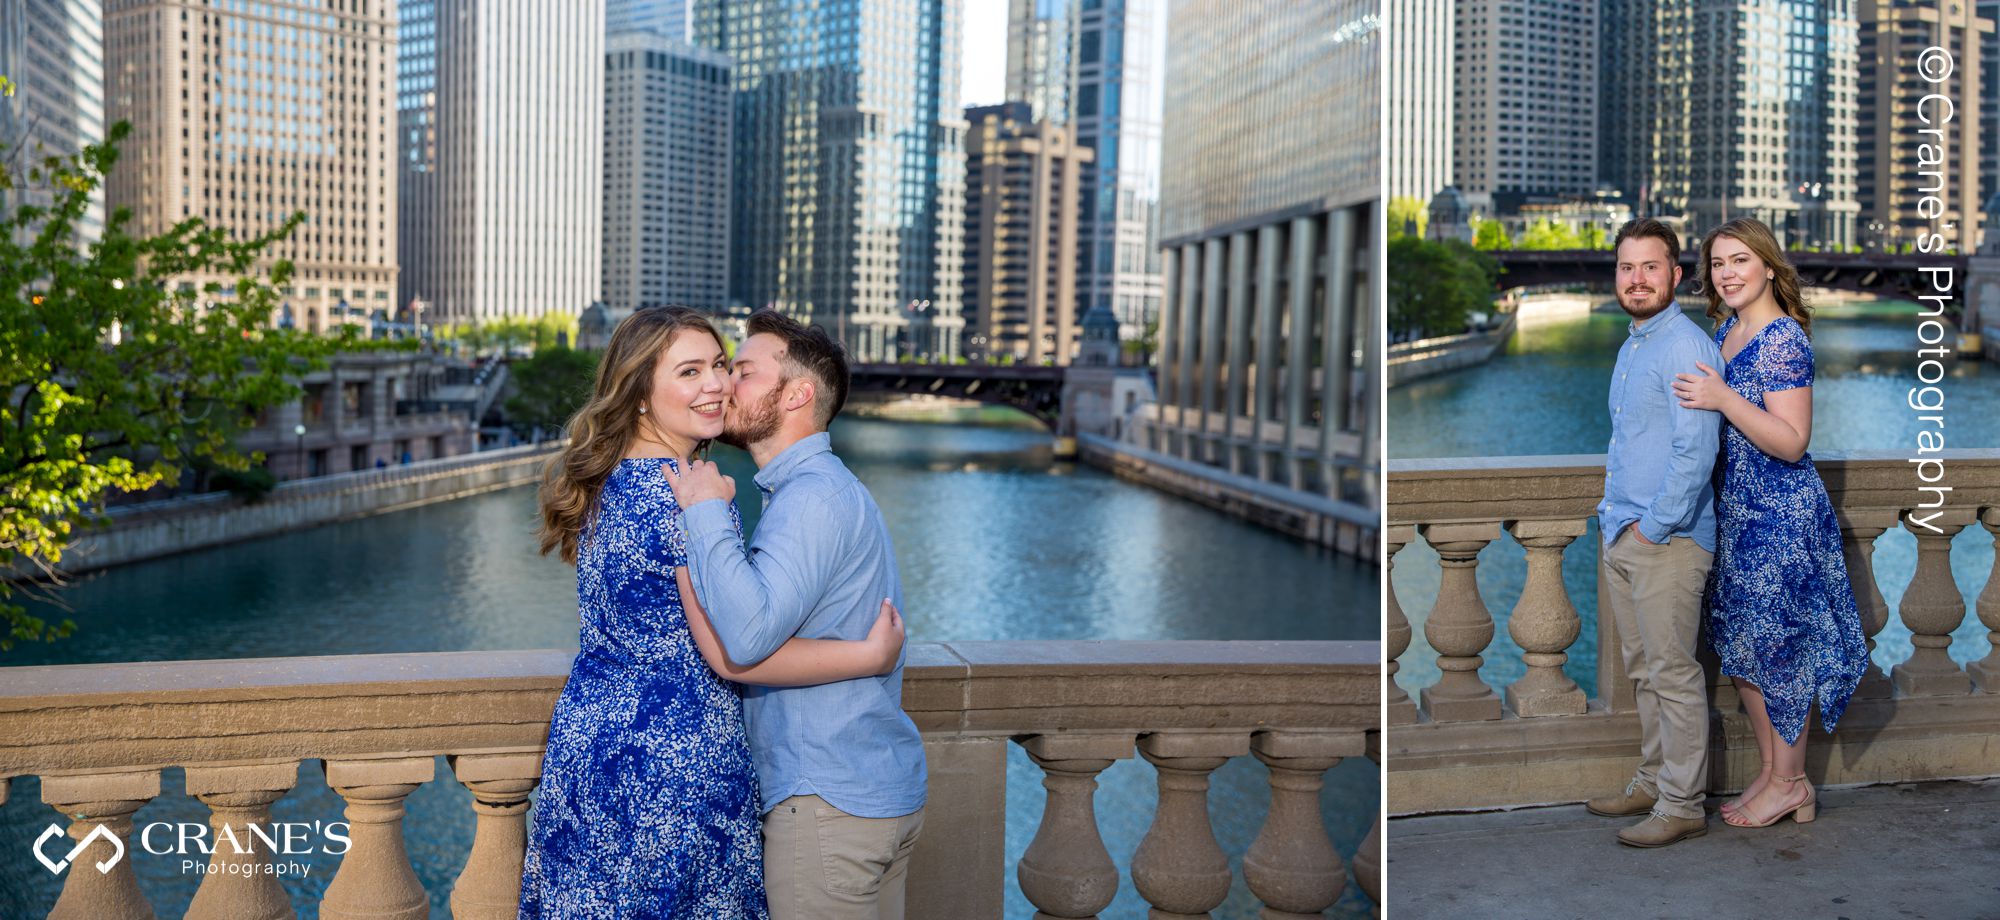 Engagement photo near the popular Wrigley Building in Chicago